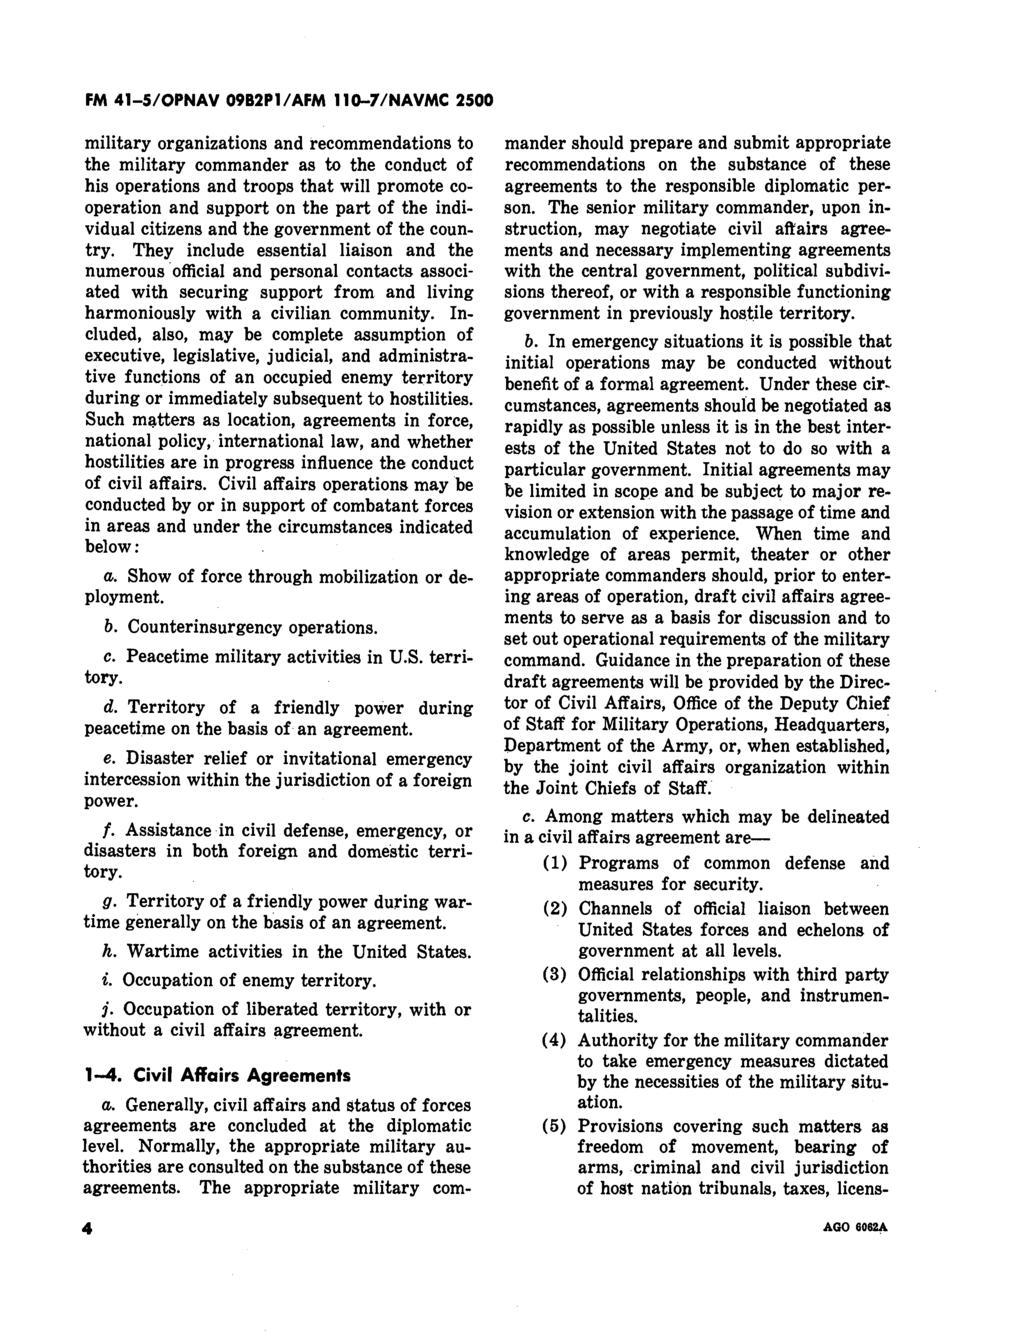 military organizations and recommendations to the military commander as to the conduct of his operations and troops that will promote cooperation and support on the part of the individual citizens